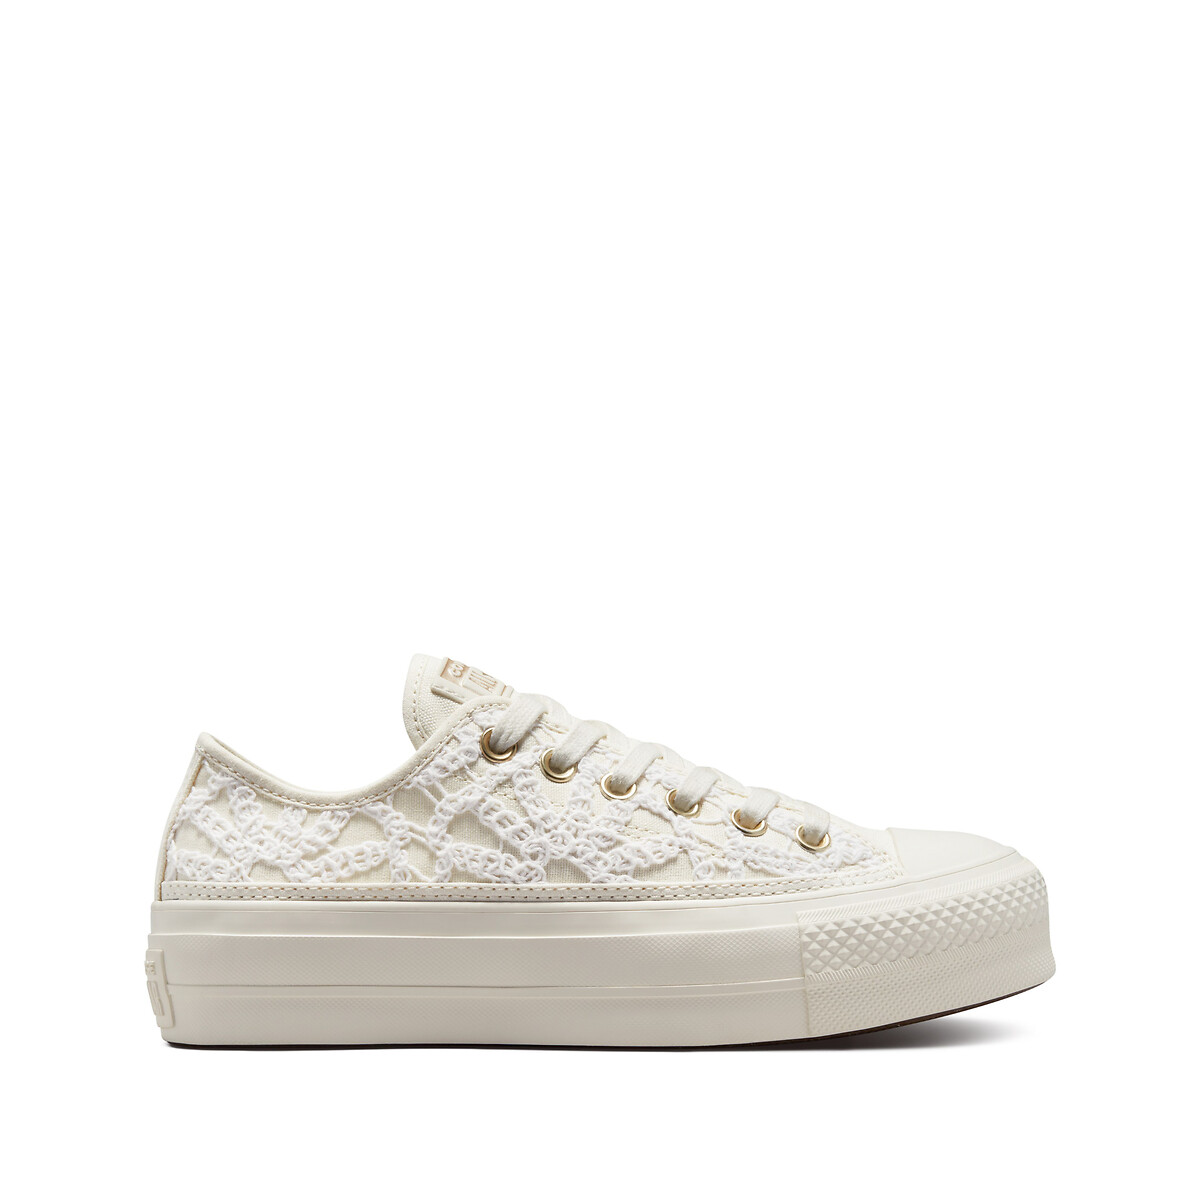 Image of All Star Lift Festival Daisy Cord Canvas Trainers